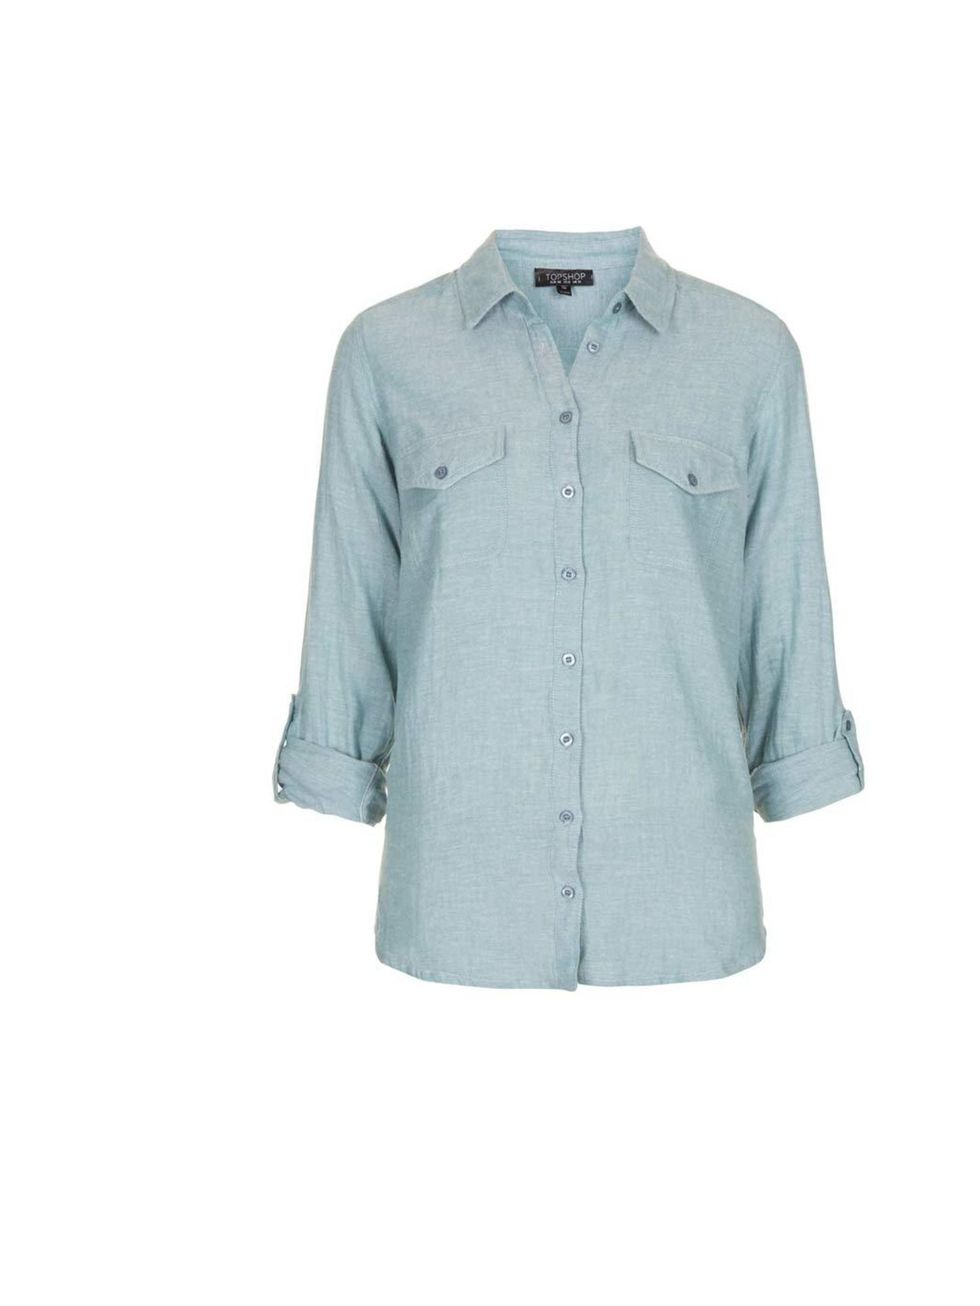 <p>Don't be afraid of double denim. Mix chambray shades with indigo.</p><p>Like this shirt from <a href="http://www.topshop.com/webapp/wcs/stores/servlet/ProductDisplay?searchTerm=chambray+shirt&amp;storeId=12556&amp;productId=11204028&amp;urlRequestType=